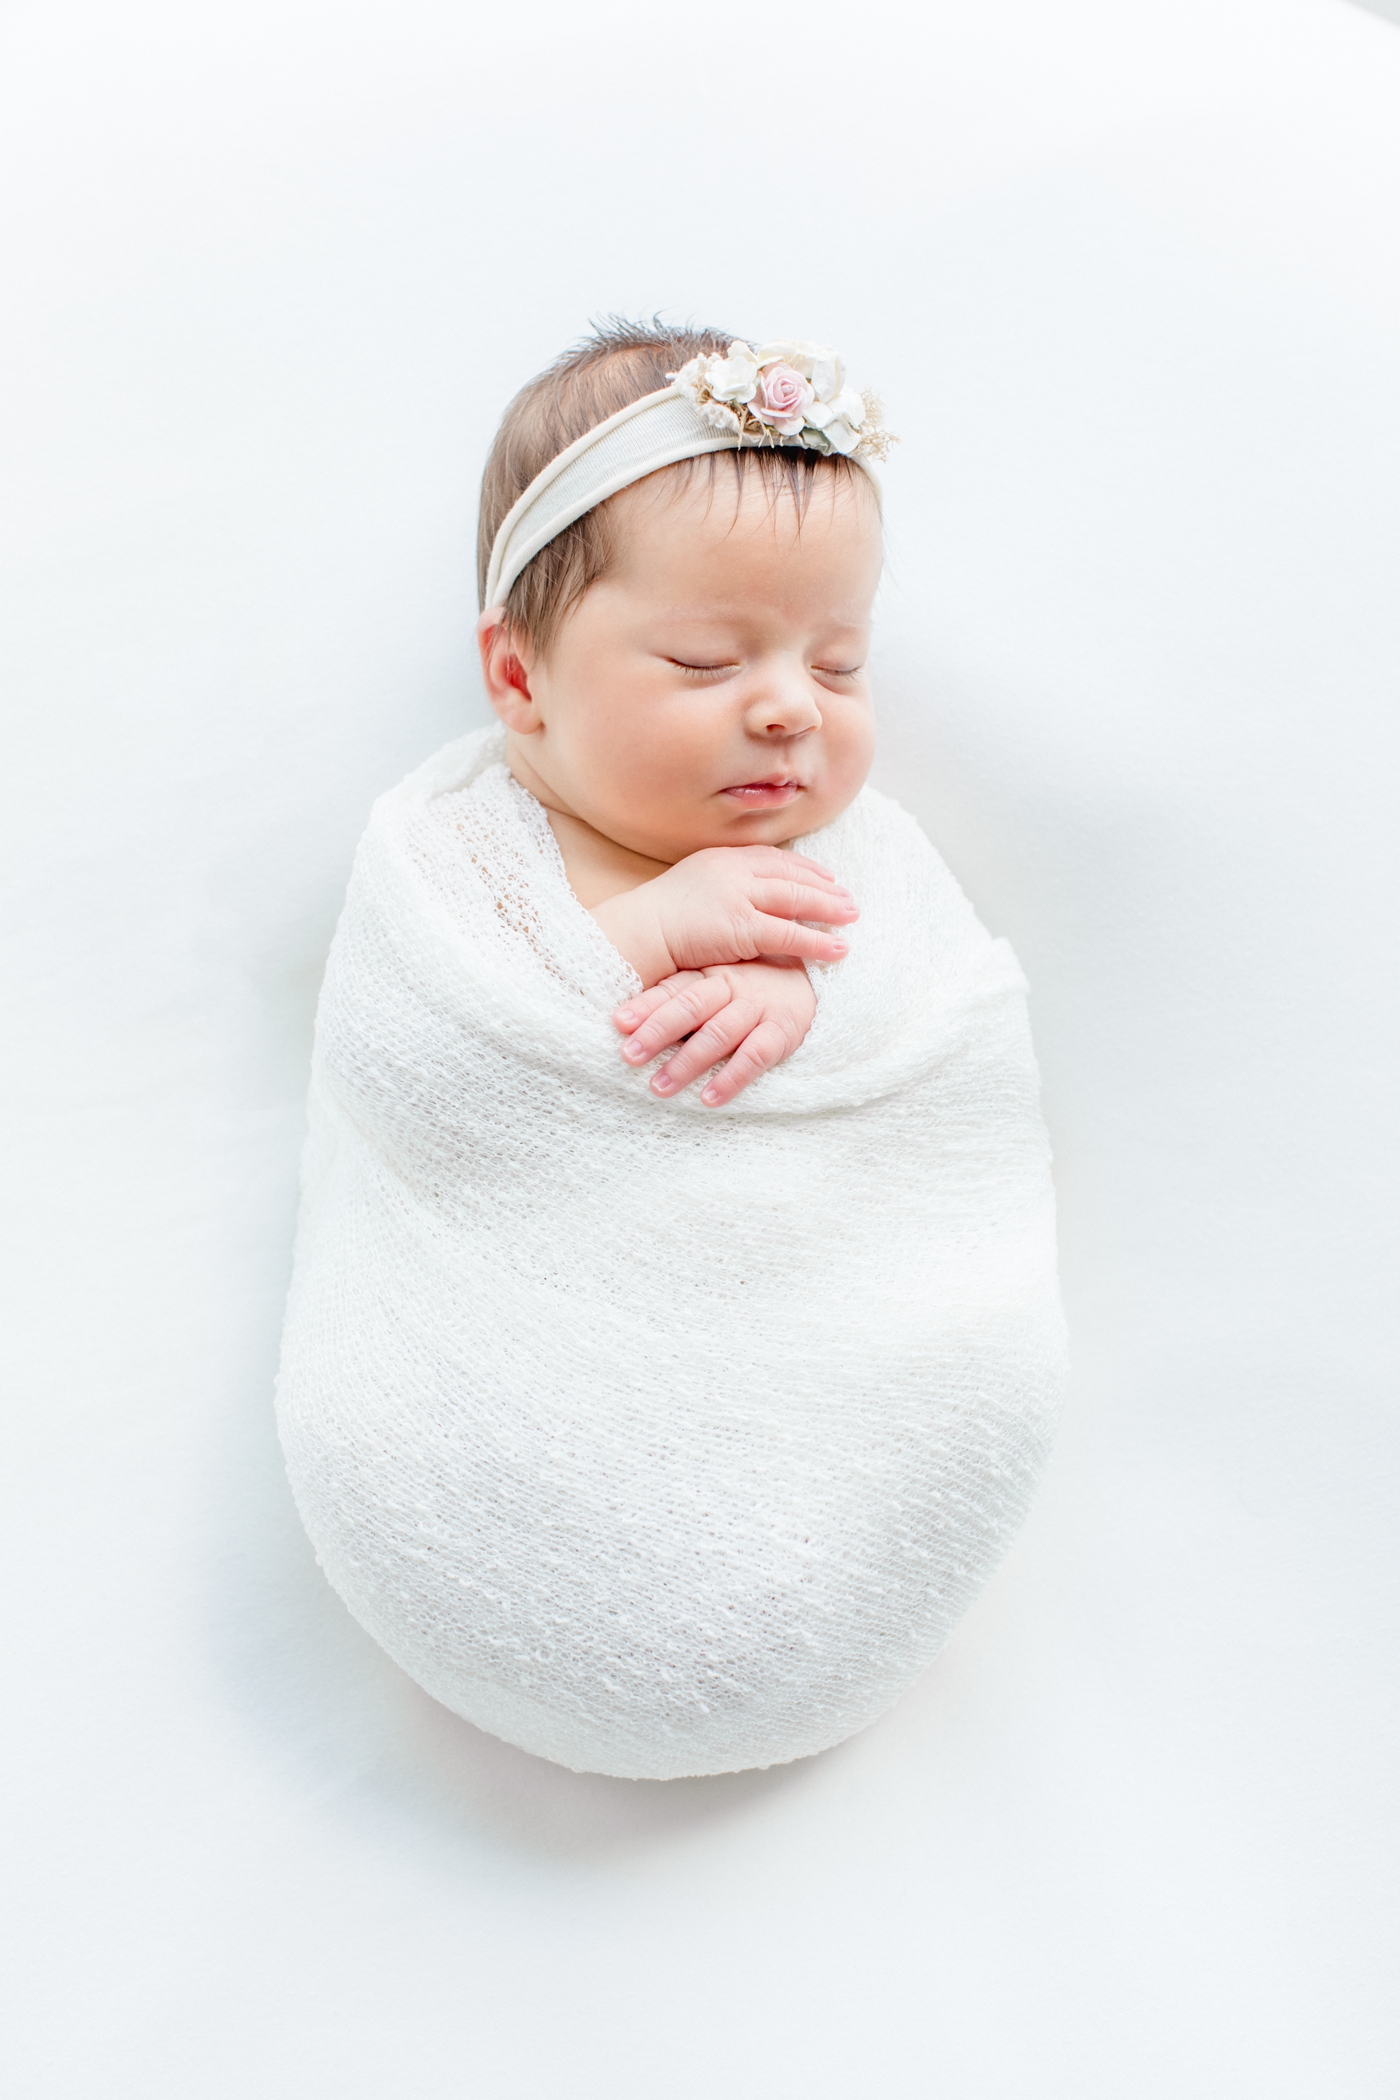 Sleeping baby girl in white swaddle on white backdrop. Photo by Sana Ahmed Photography.